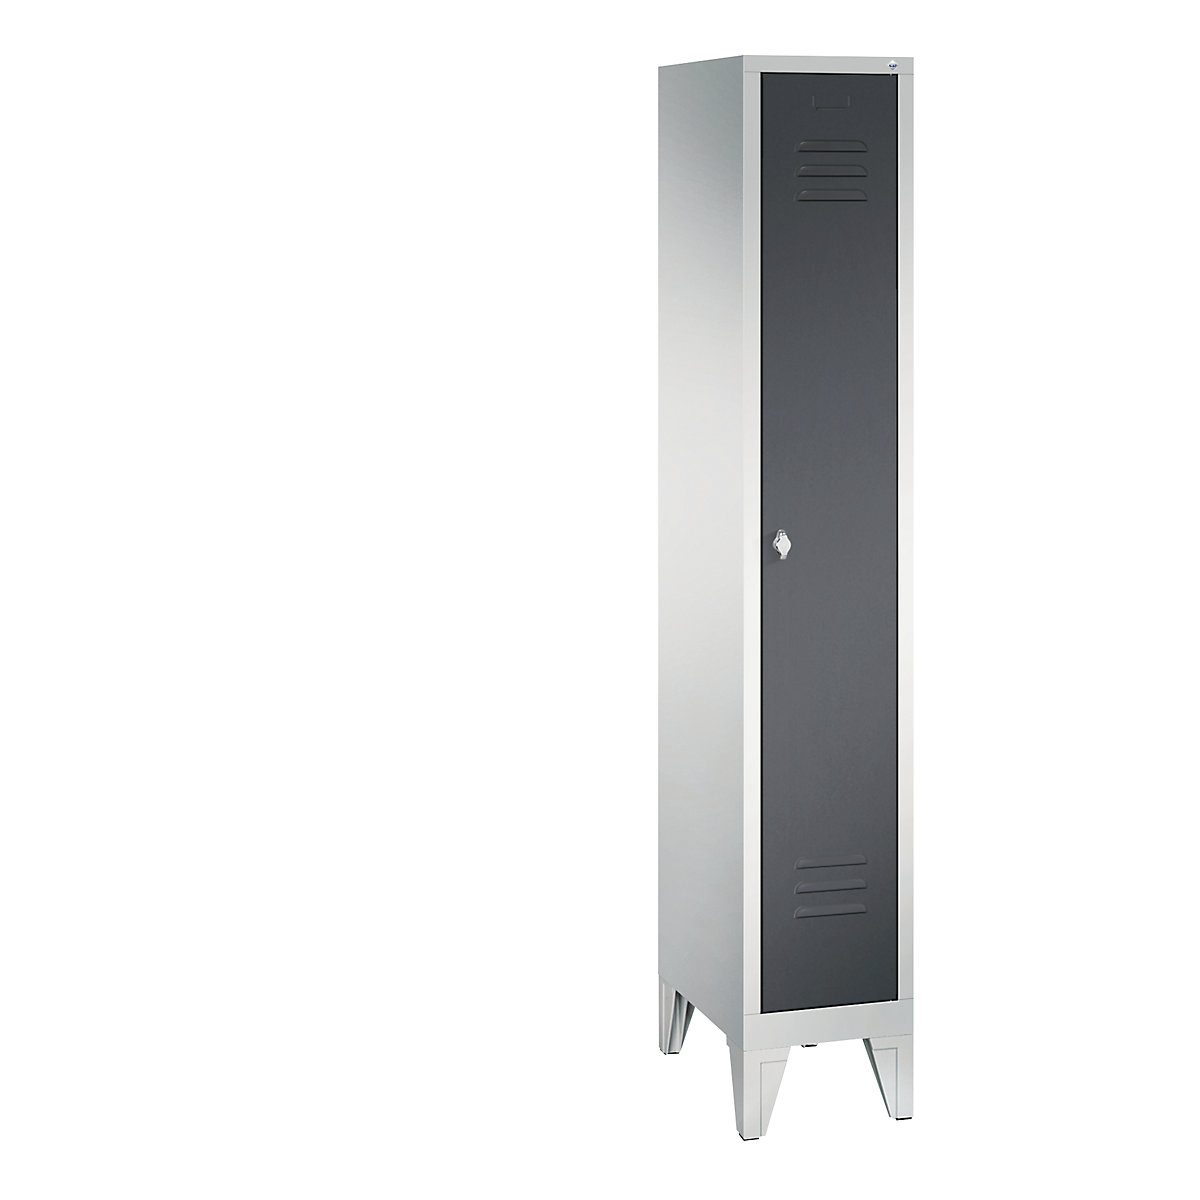 CLASSIC cloakroom locker with feet – C+P, 1 compartment, compartment width 300 mm, light grey / black grey-10